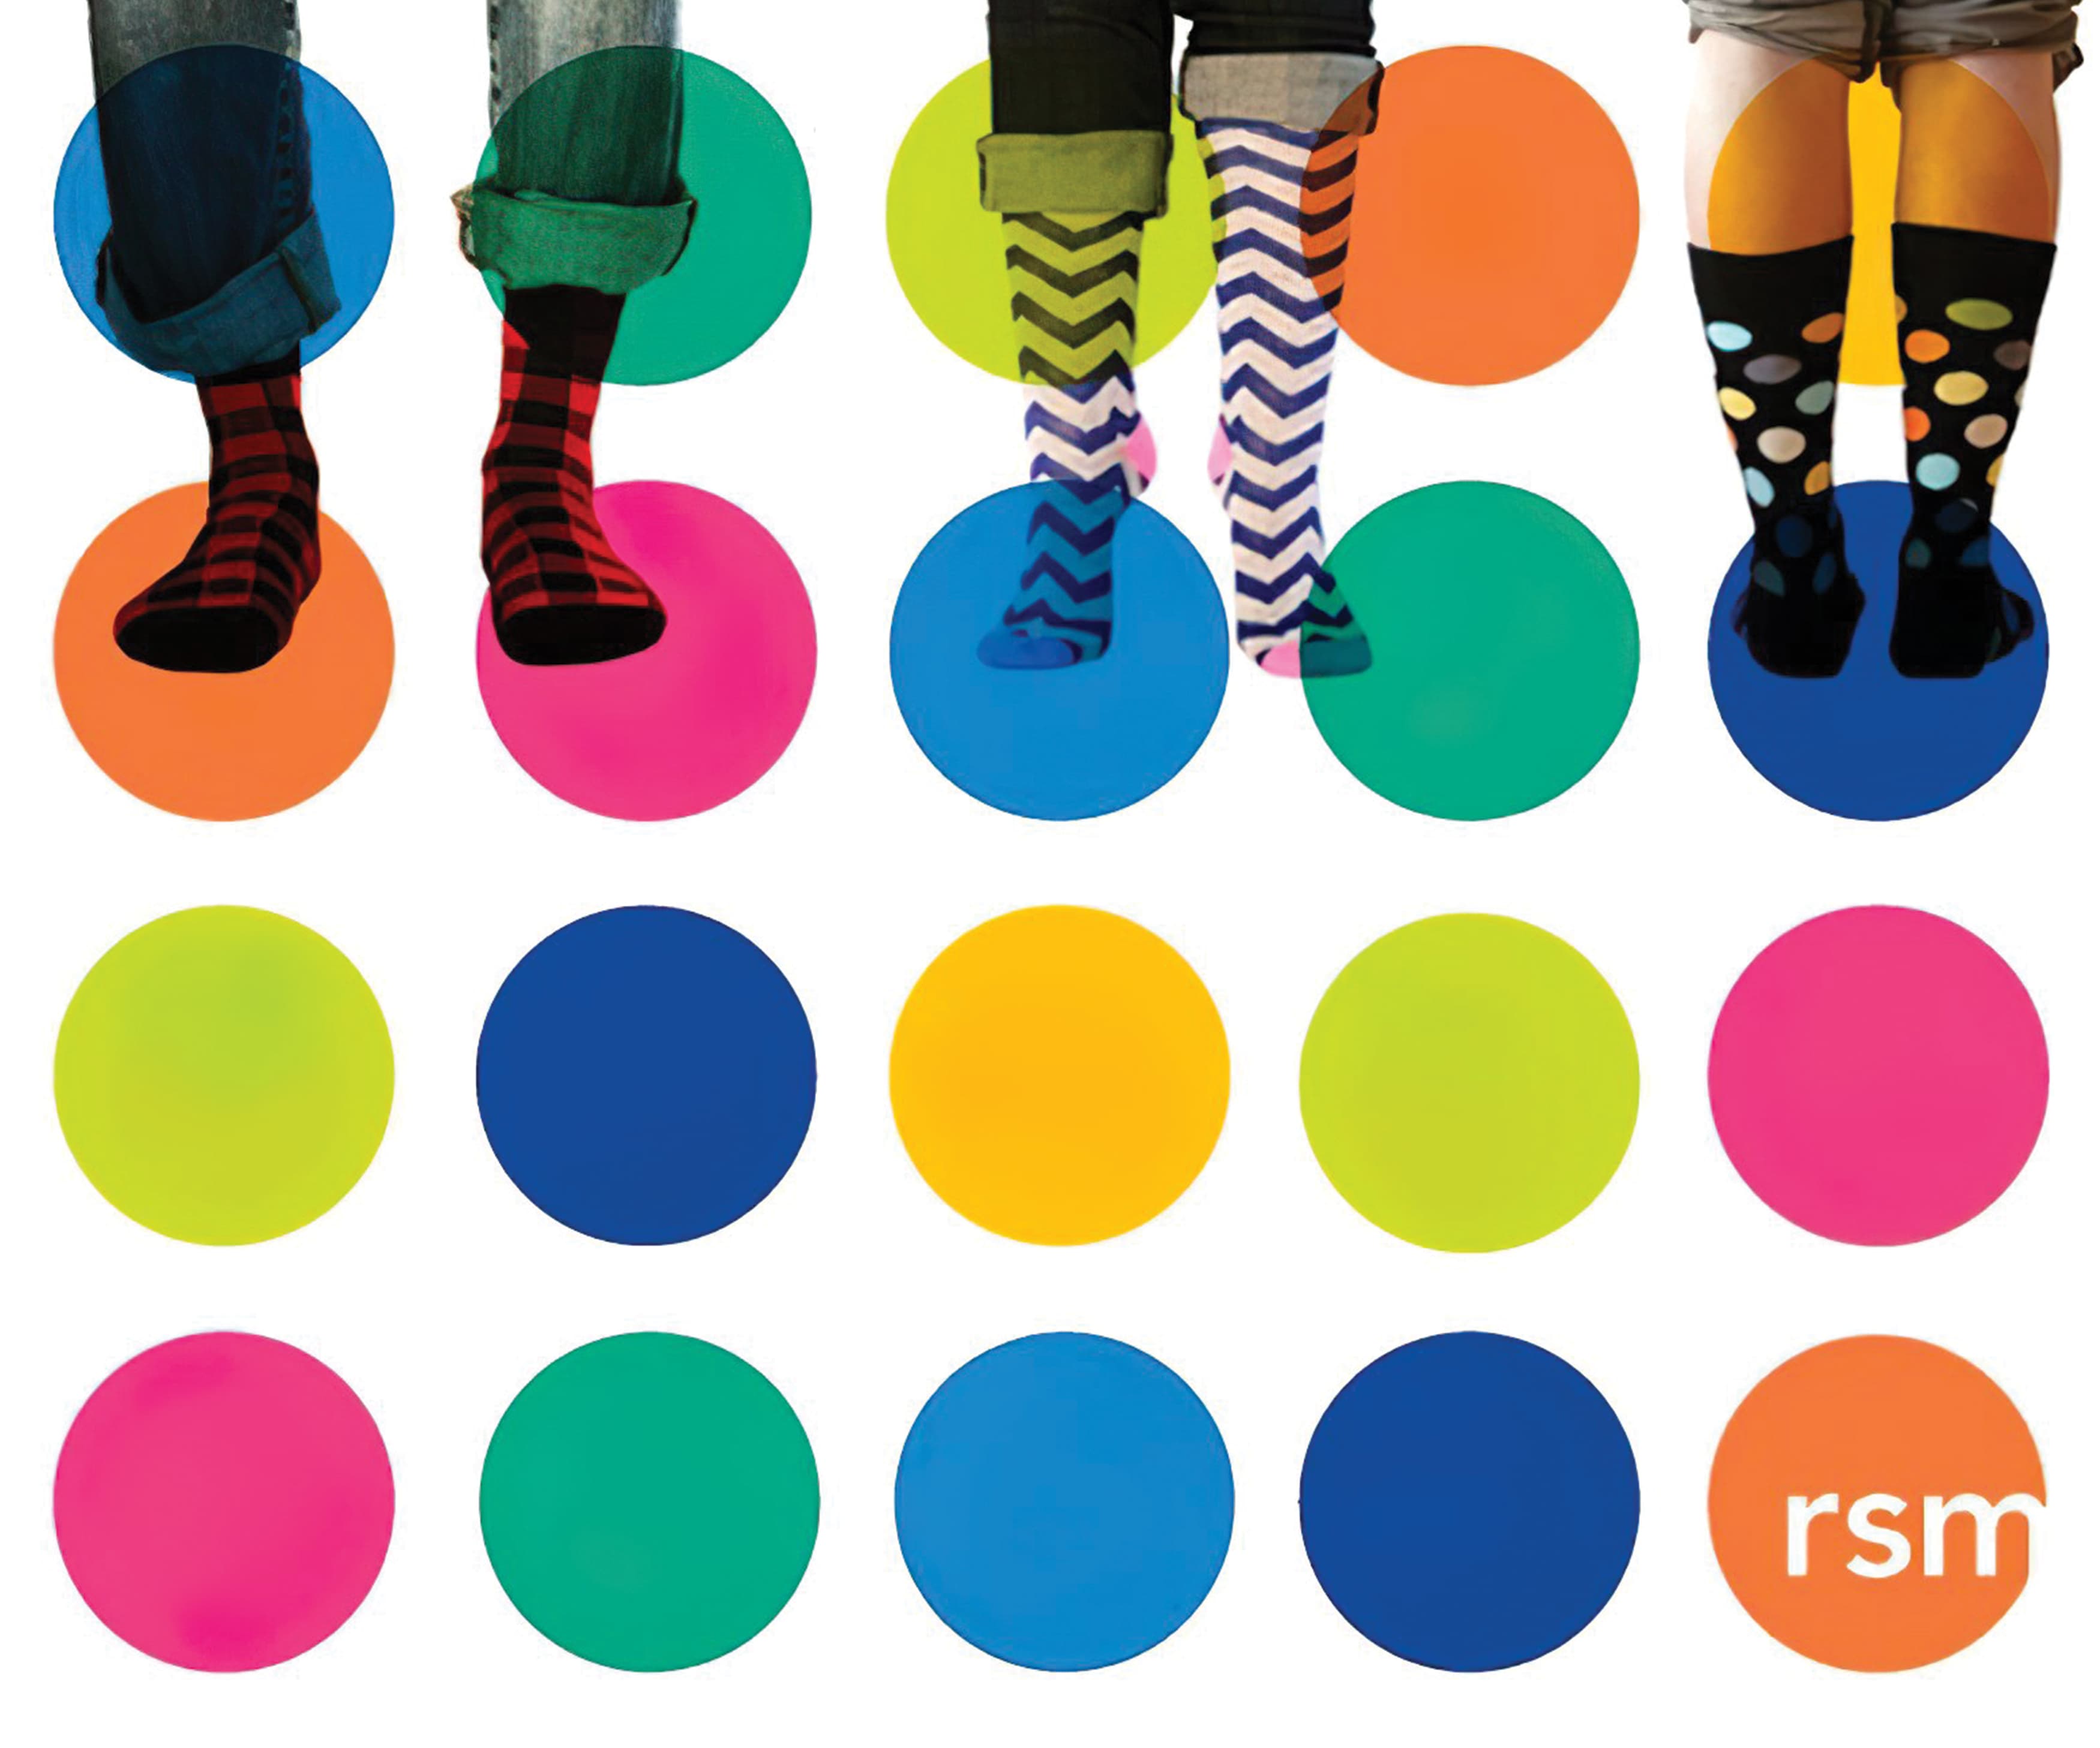 A graphic depicting socks and the RSM logo along with a pattern of multi-colored dots.